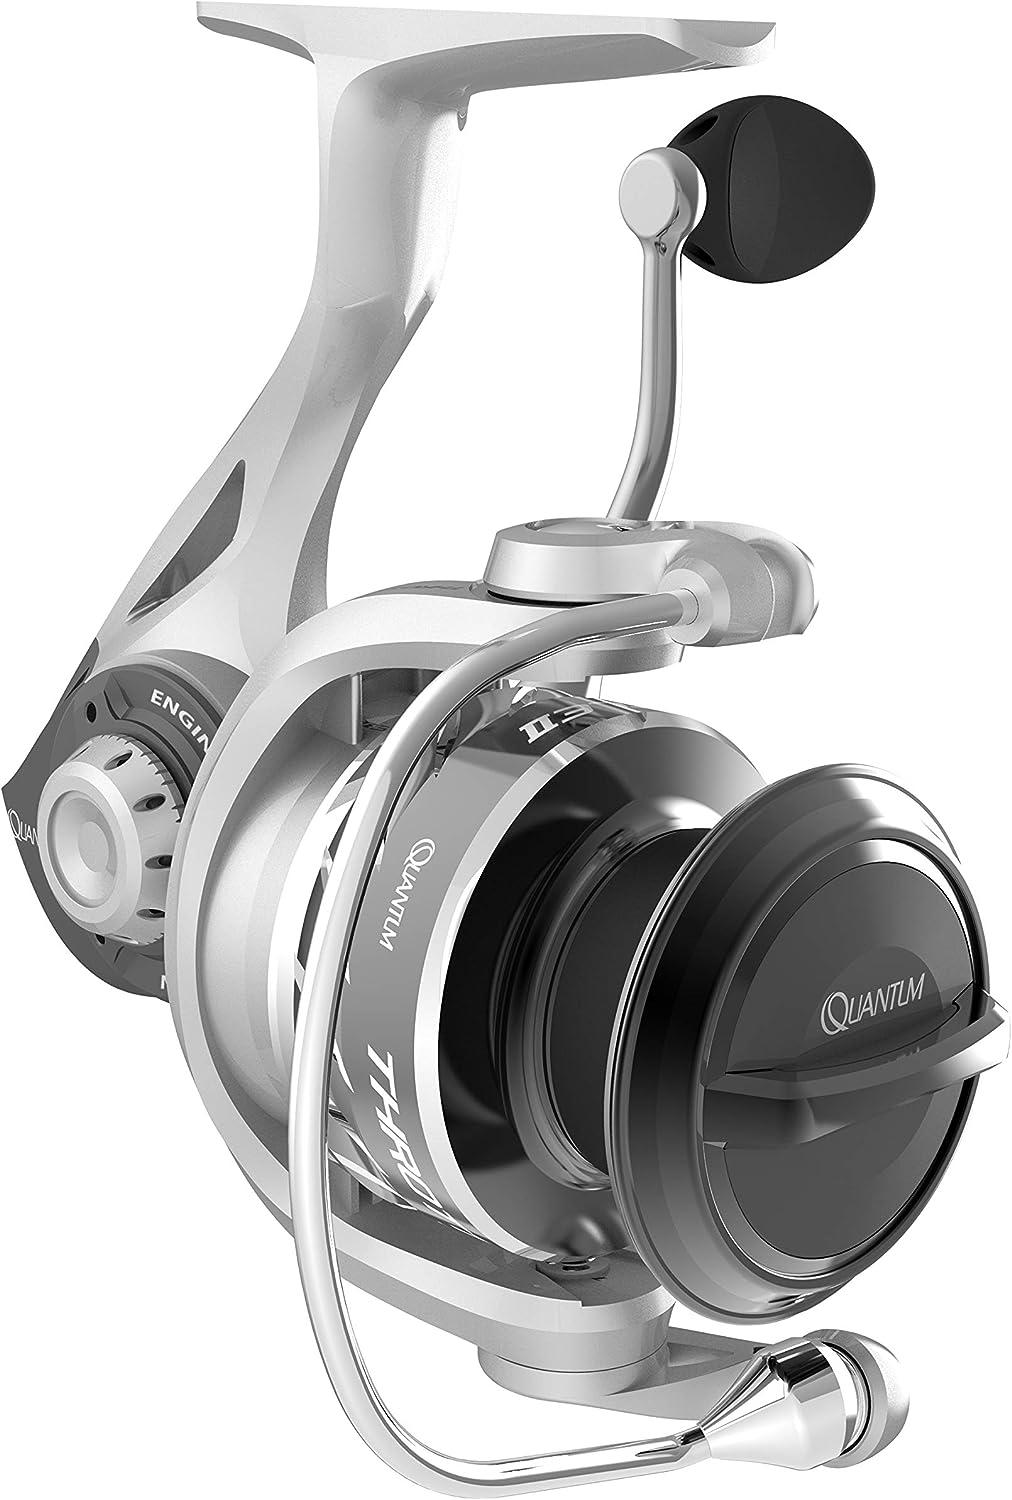 Quantum Throttle II Spinning Fishing Reel, 11 Bearings (10 + Clutch),  Continuous Anti-Reverse with Front-Adjustable Drag, Ultra-Smooth and  Durable Gears, Clam Packaging